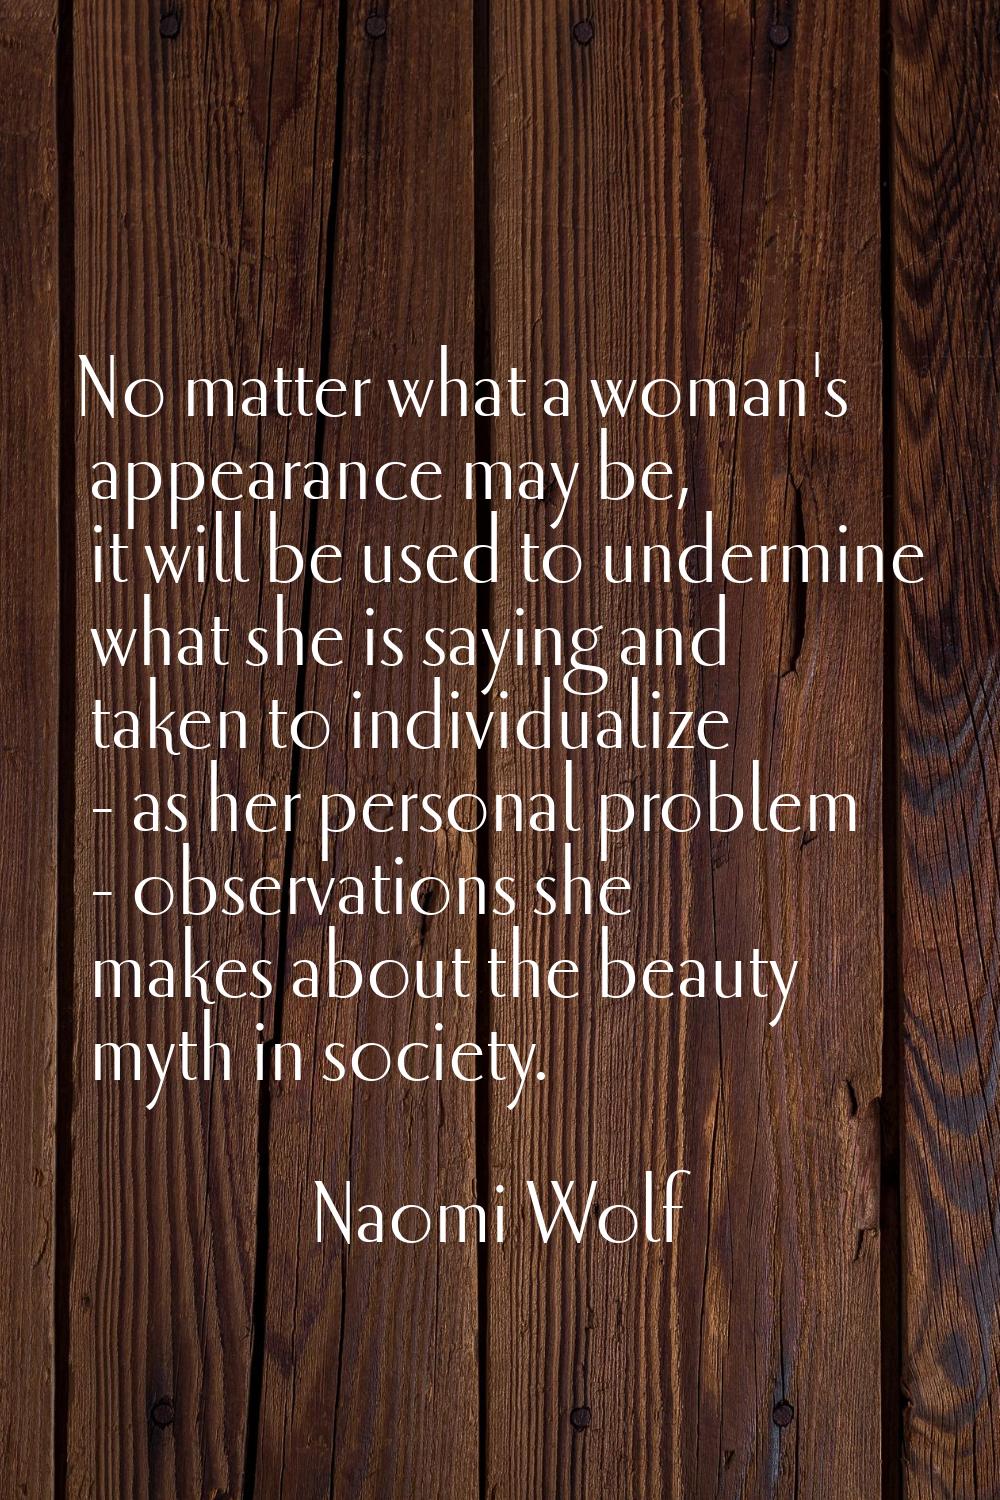 No matter what a woman's appearance may be, it will be used to undermine what she is saying and tak